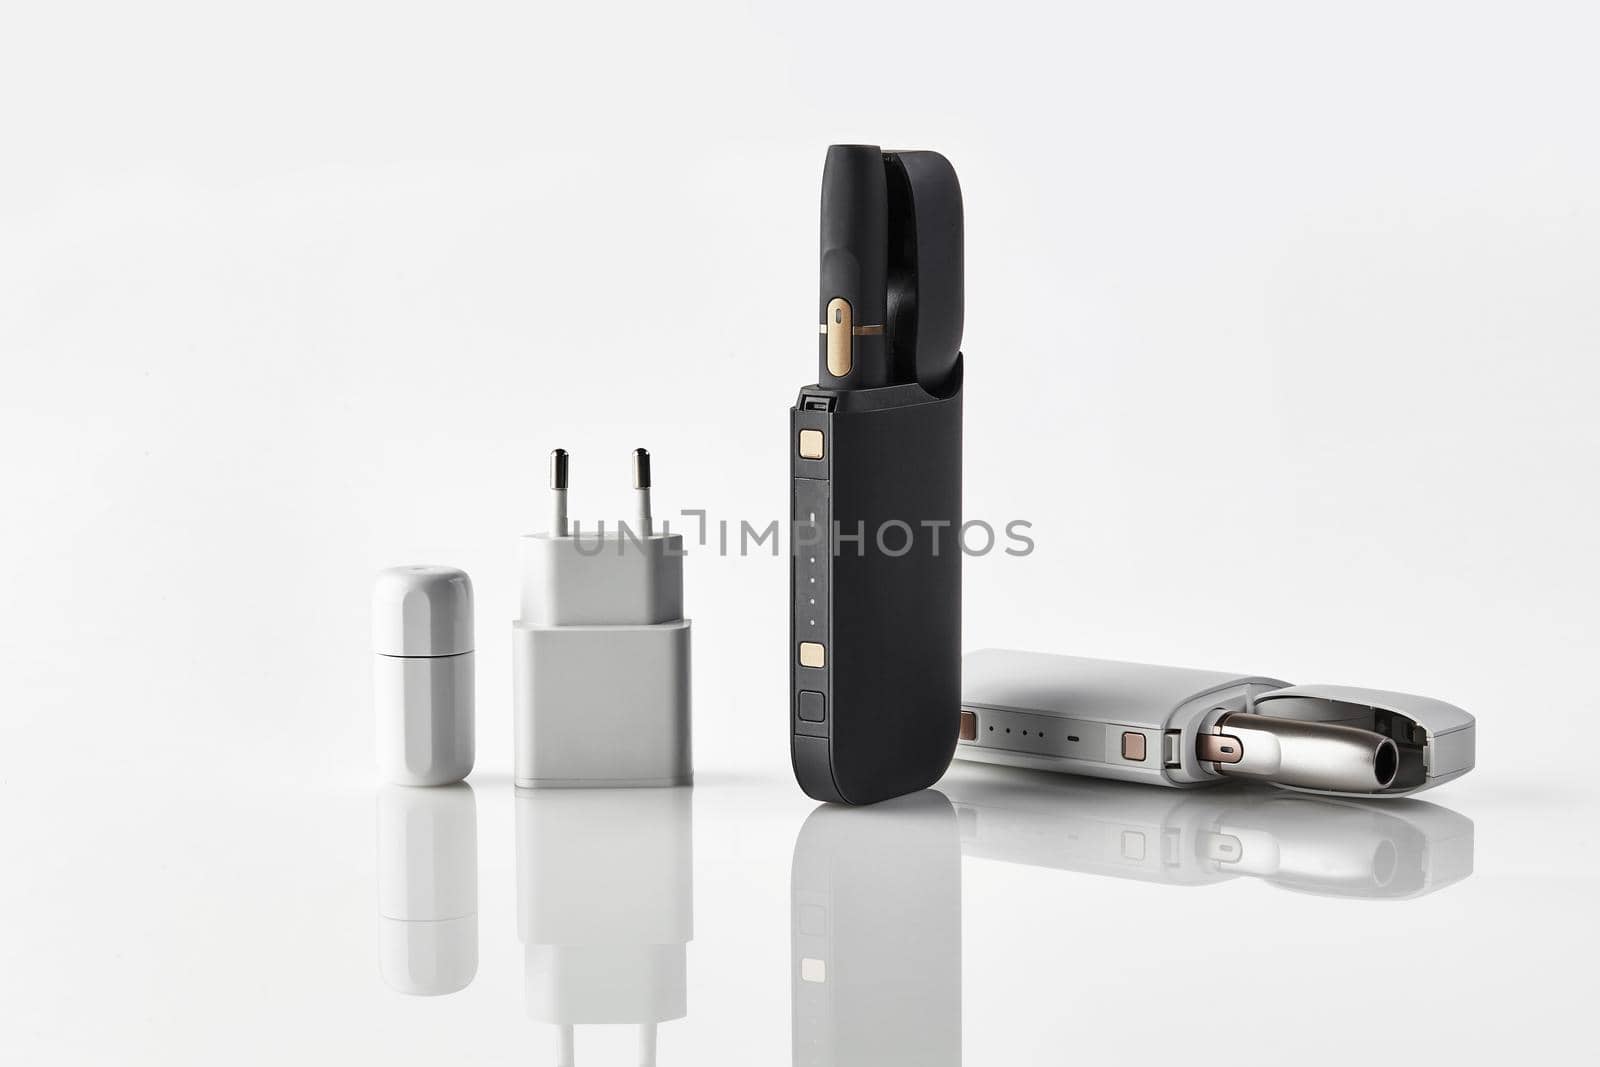 New generation black and white electronic cigarettes in open batteries, cleaner, power adapter isolated on white. Hi-tech heating tobacco system. Tools used to help stop smoking. Close up, copy space